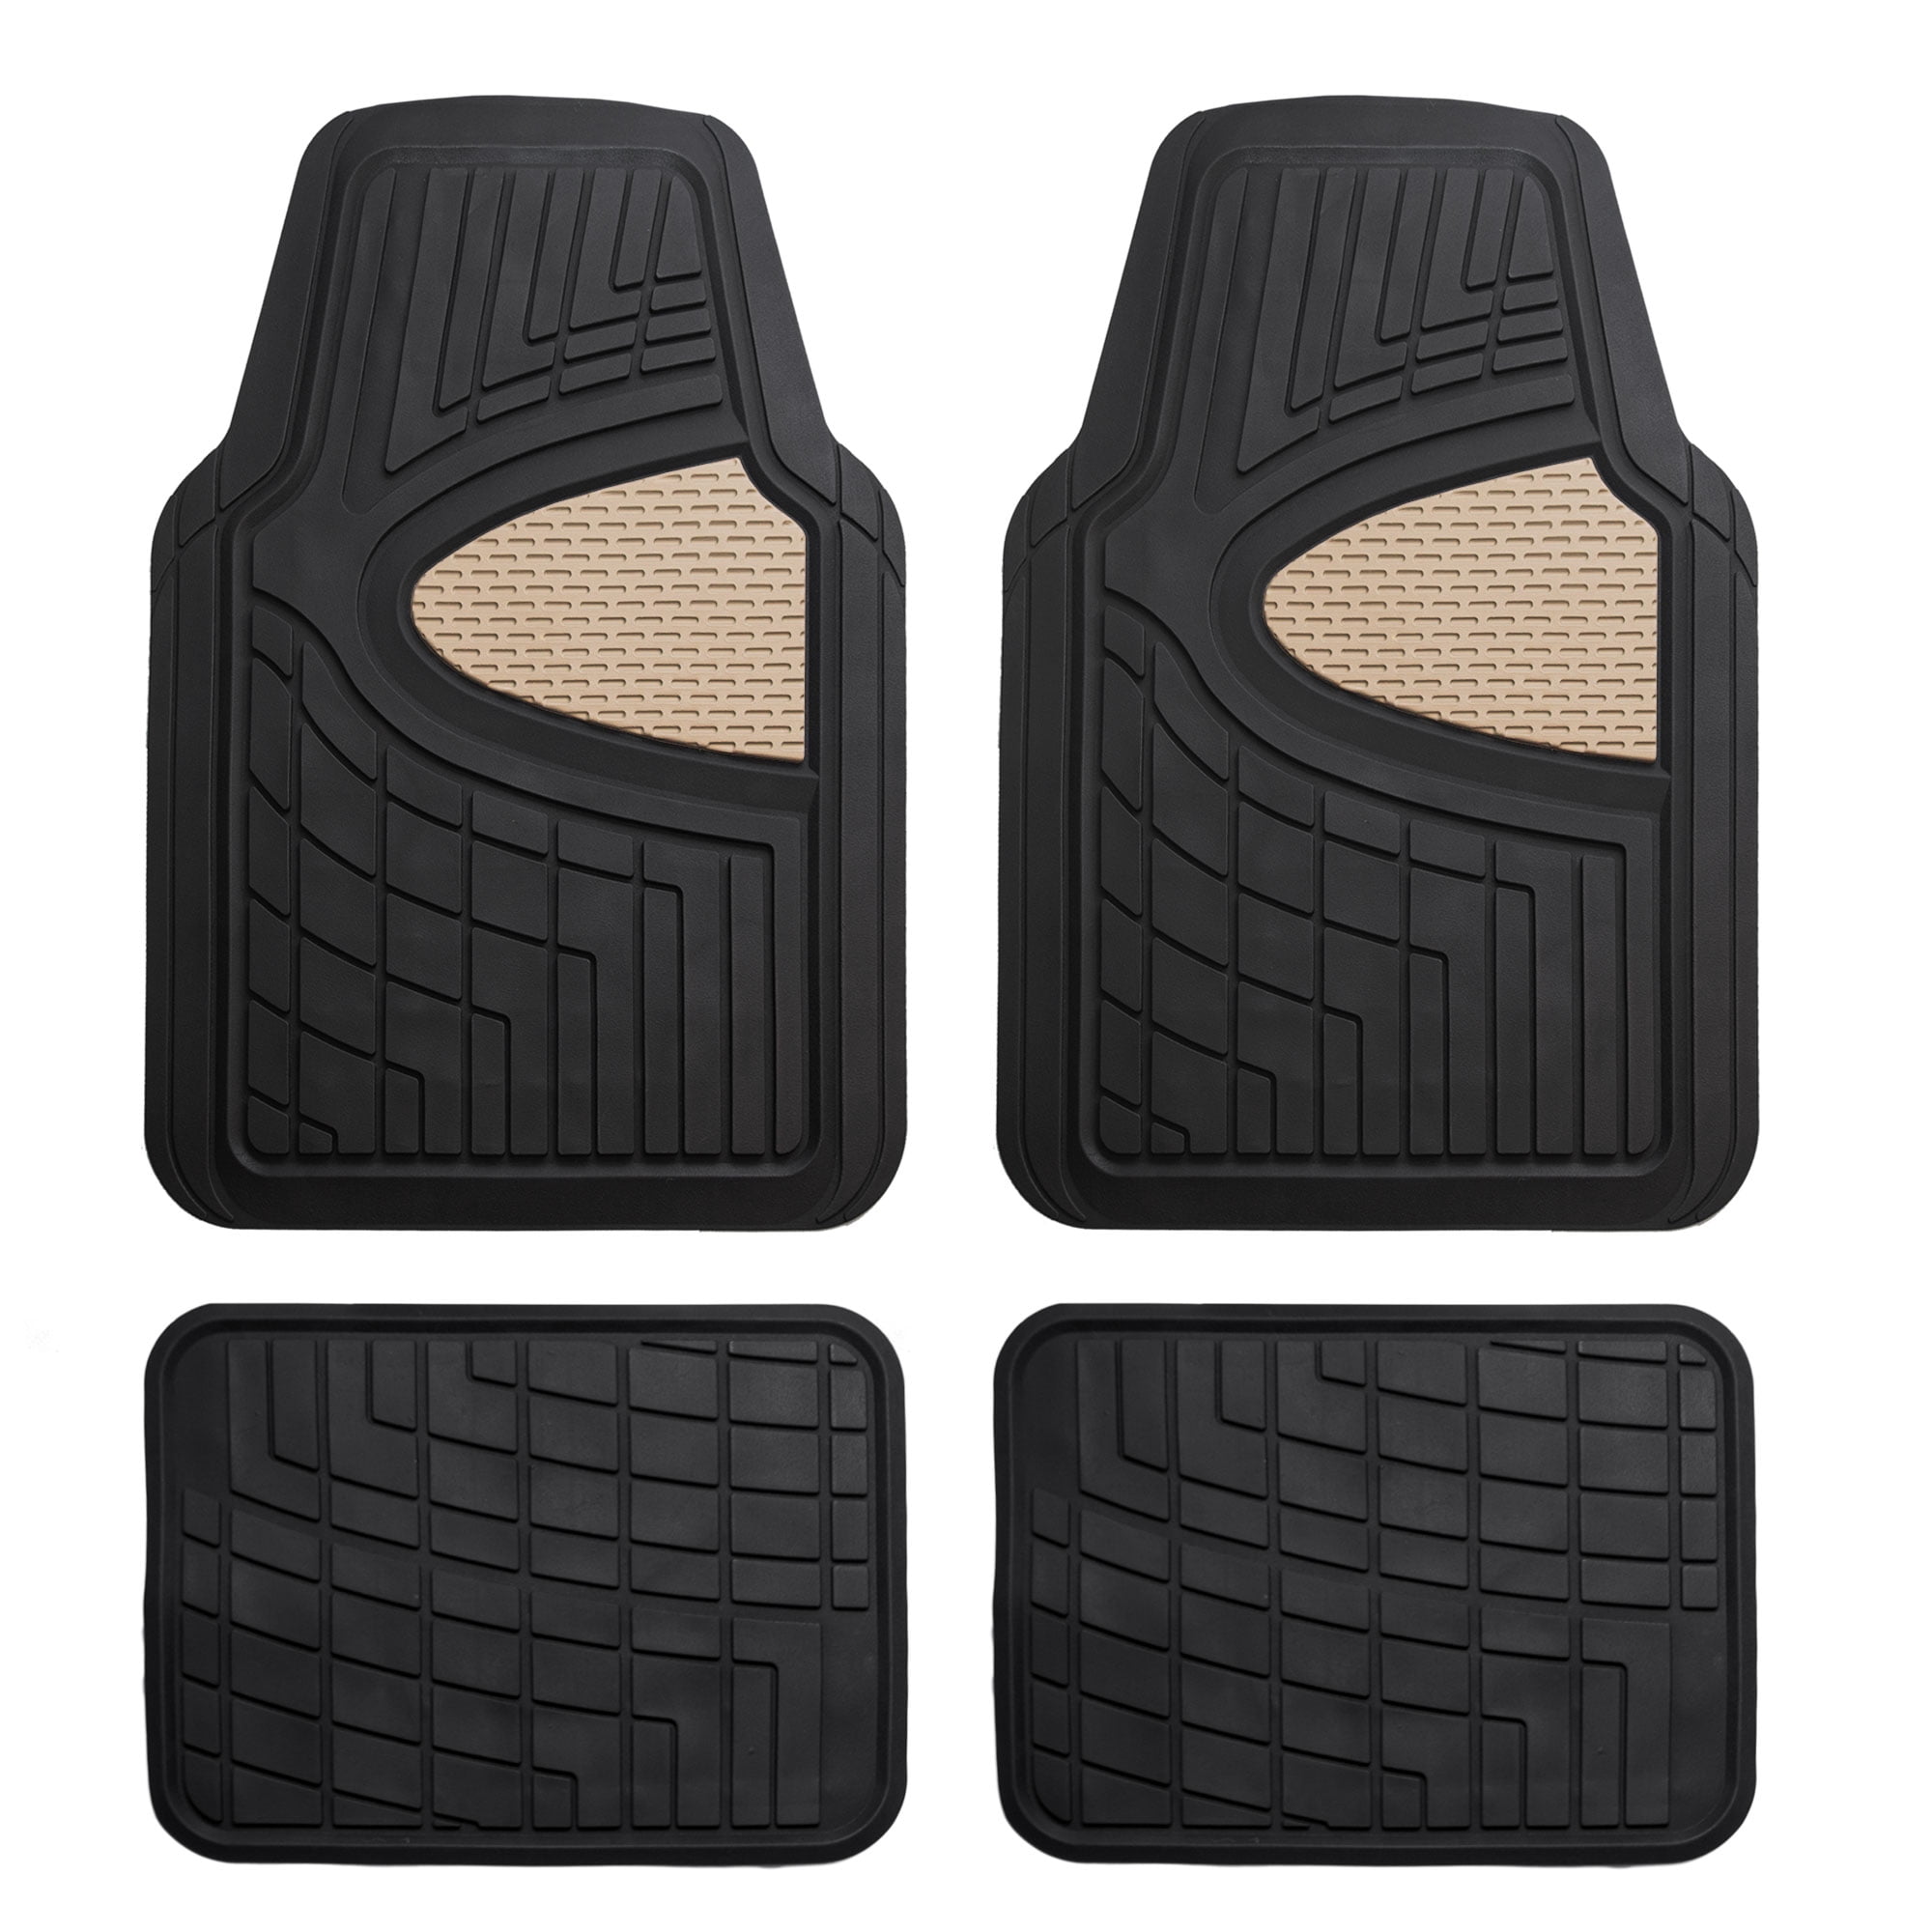 Original Superman Rubber Floor Mats for Car SUV Truck 4 PC Trimmable Heavy Duty 